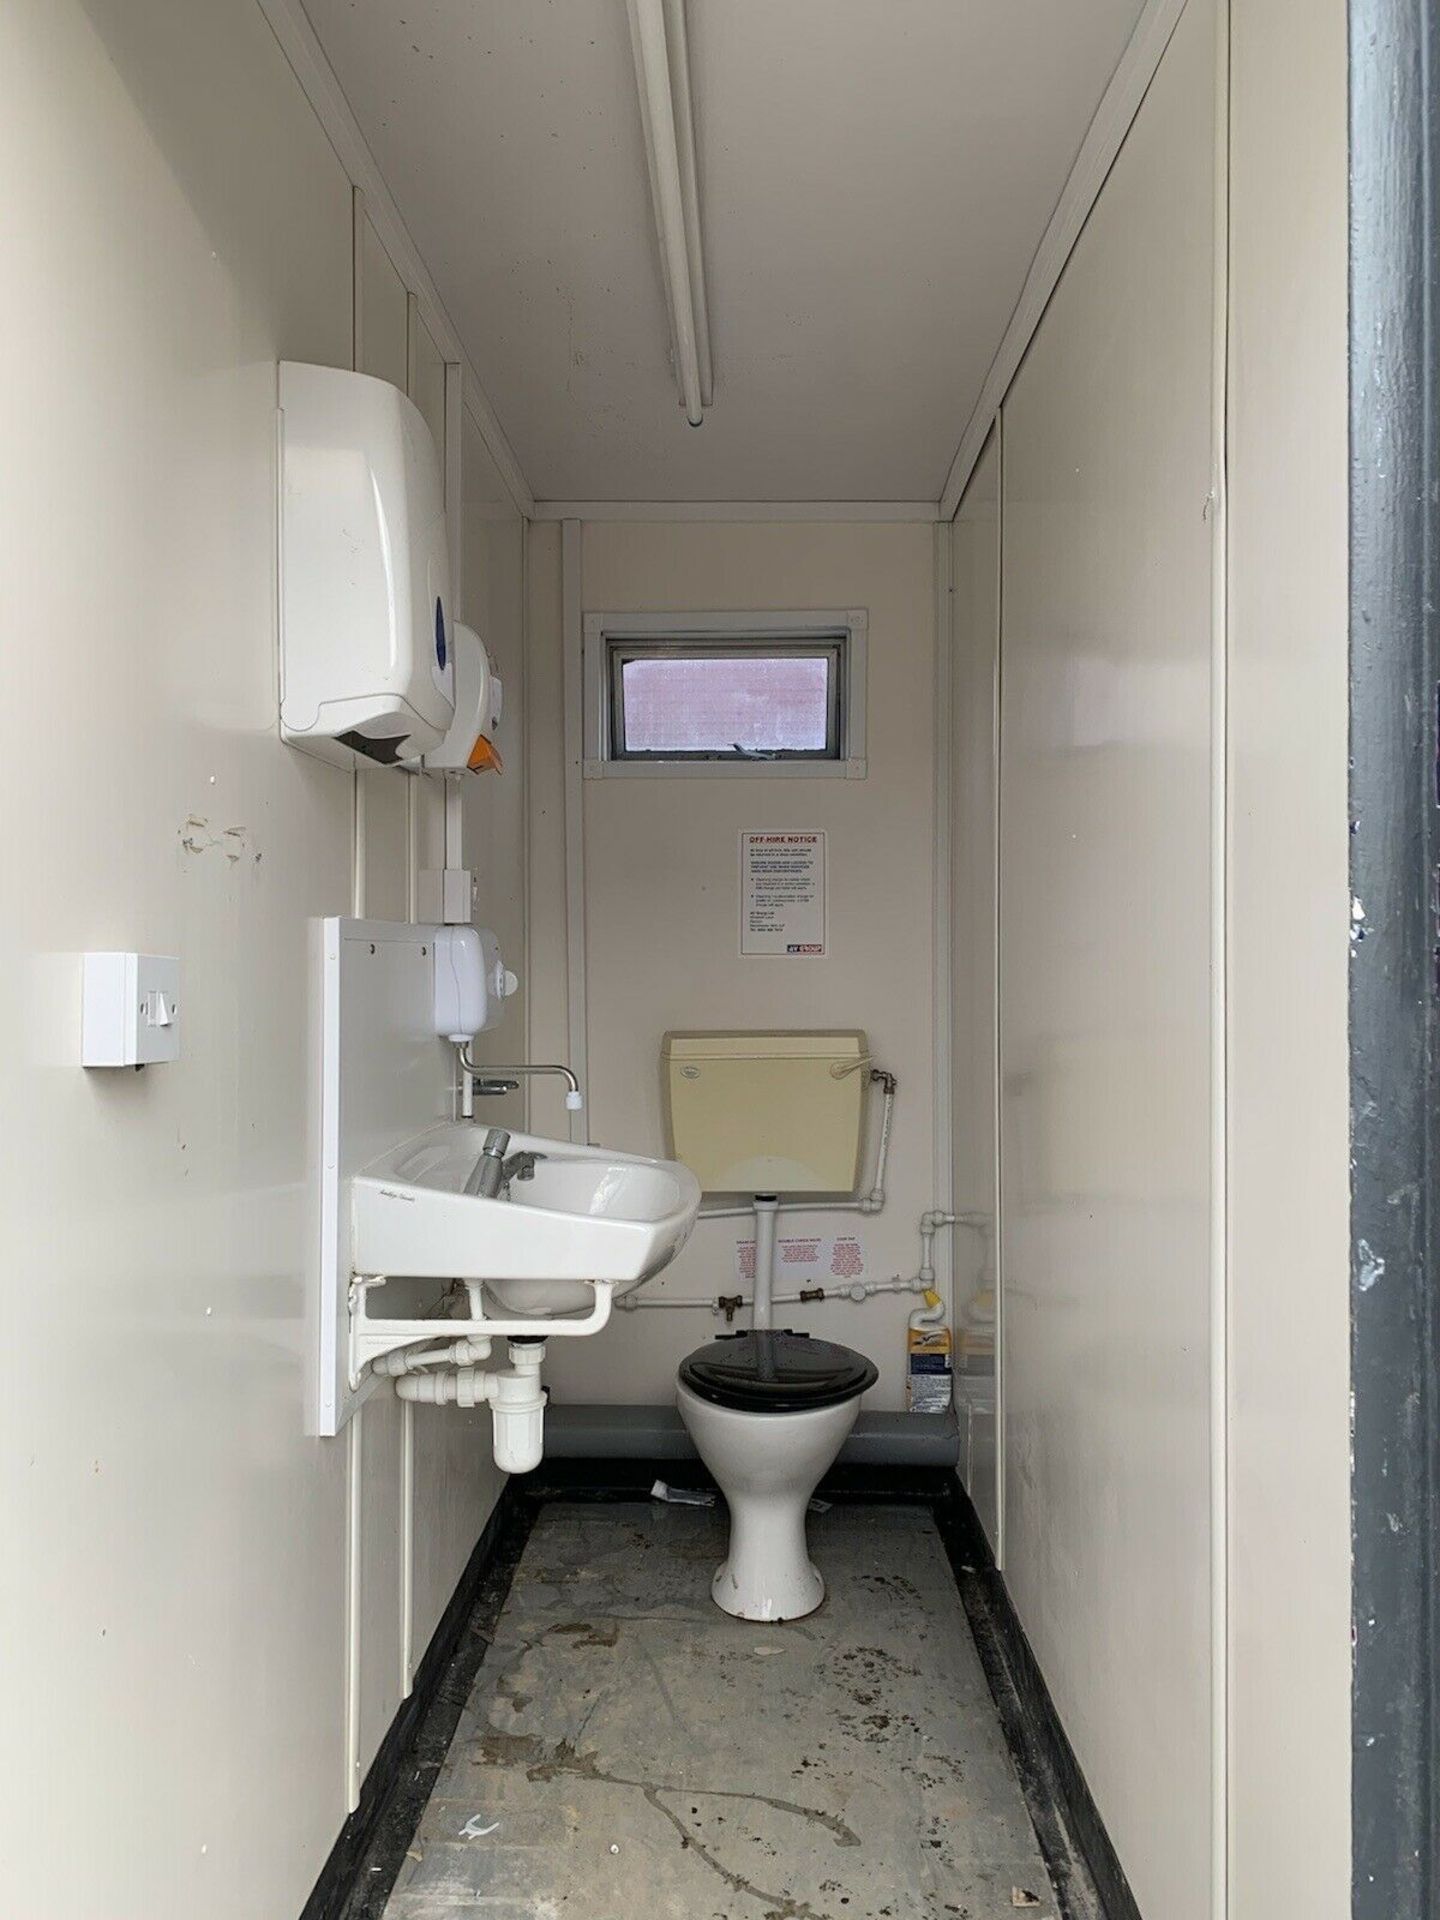 Portable Toilet Block Site Loo Container - Image 5 of 10